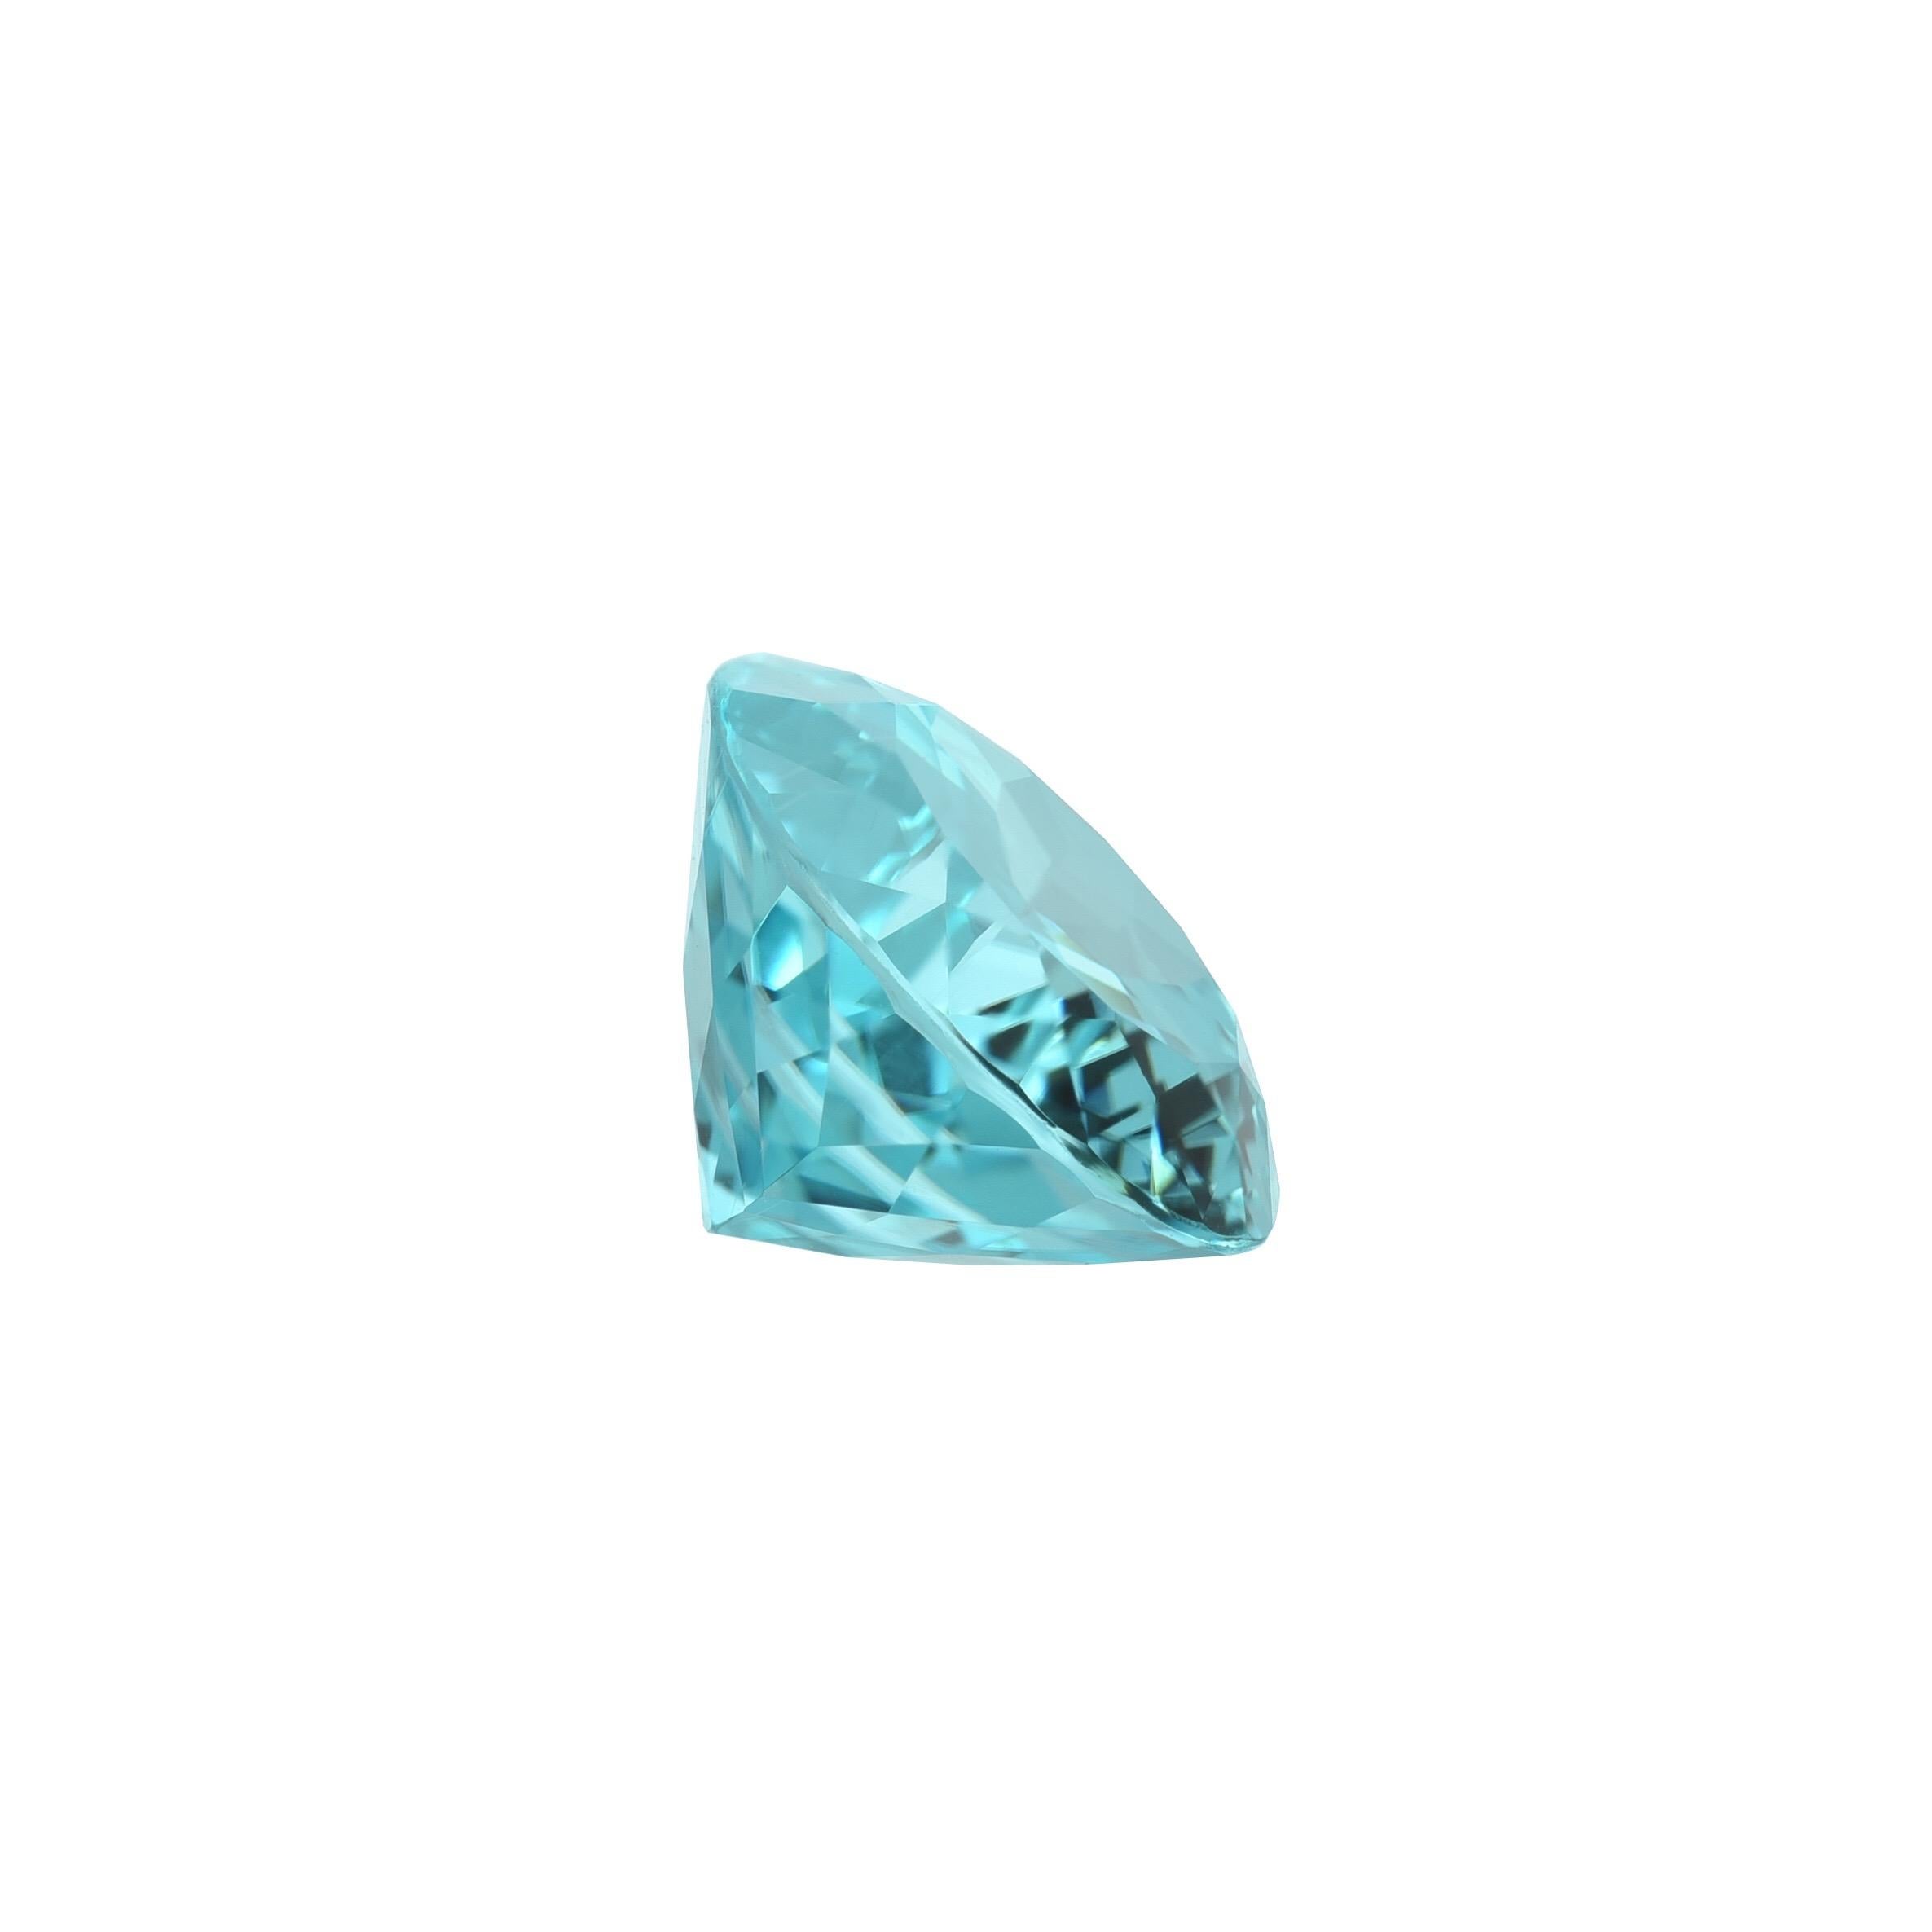 Exceptional, rare and coveted, 6.47 carat Paraiba Tourmaline oval gem, offered unmounted to the world's most avid gem collectors. This gem is superior in color, clarity, and cut.
Returns are accepted and paid by us within 7 days of delivery.
The GIA